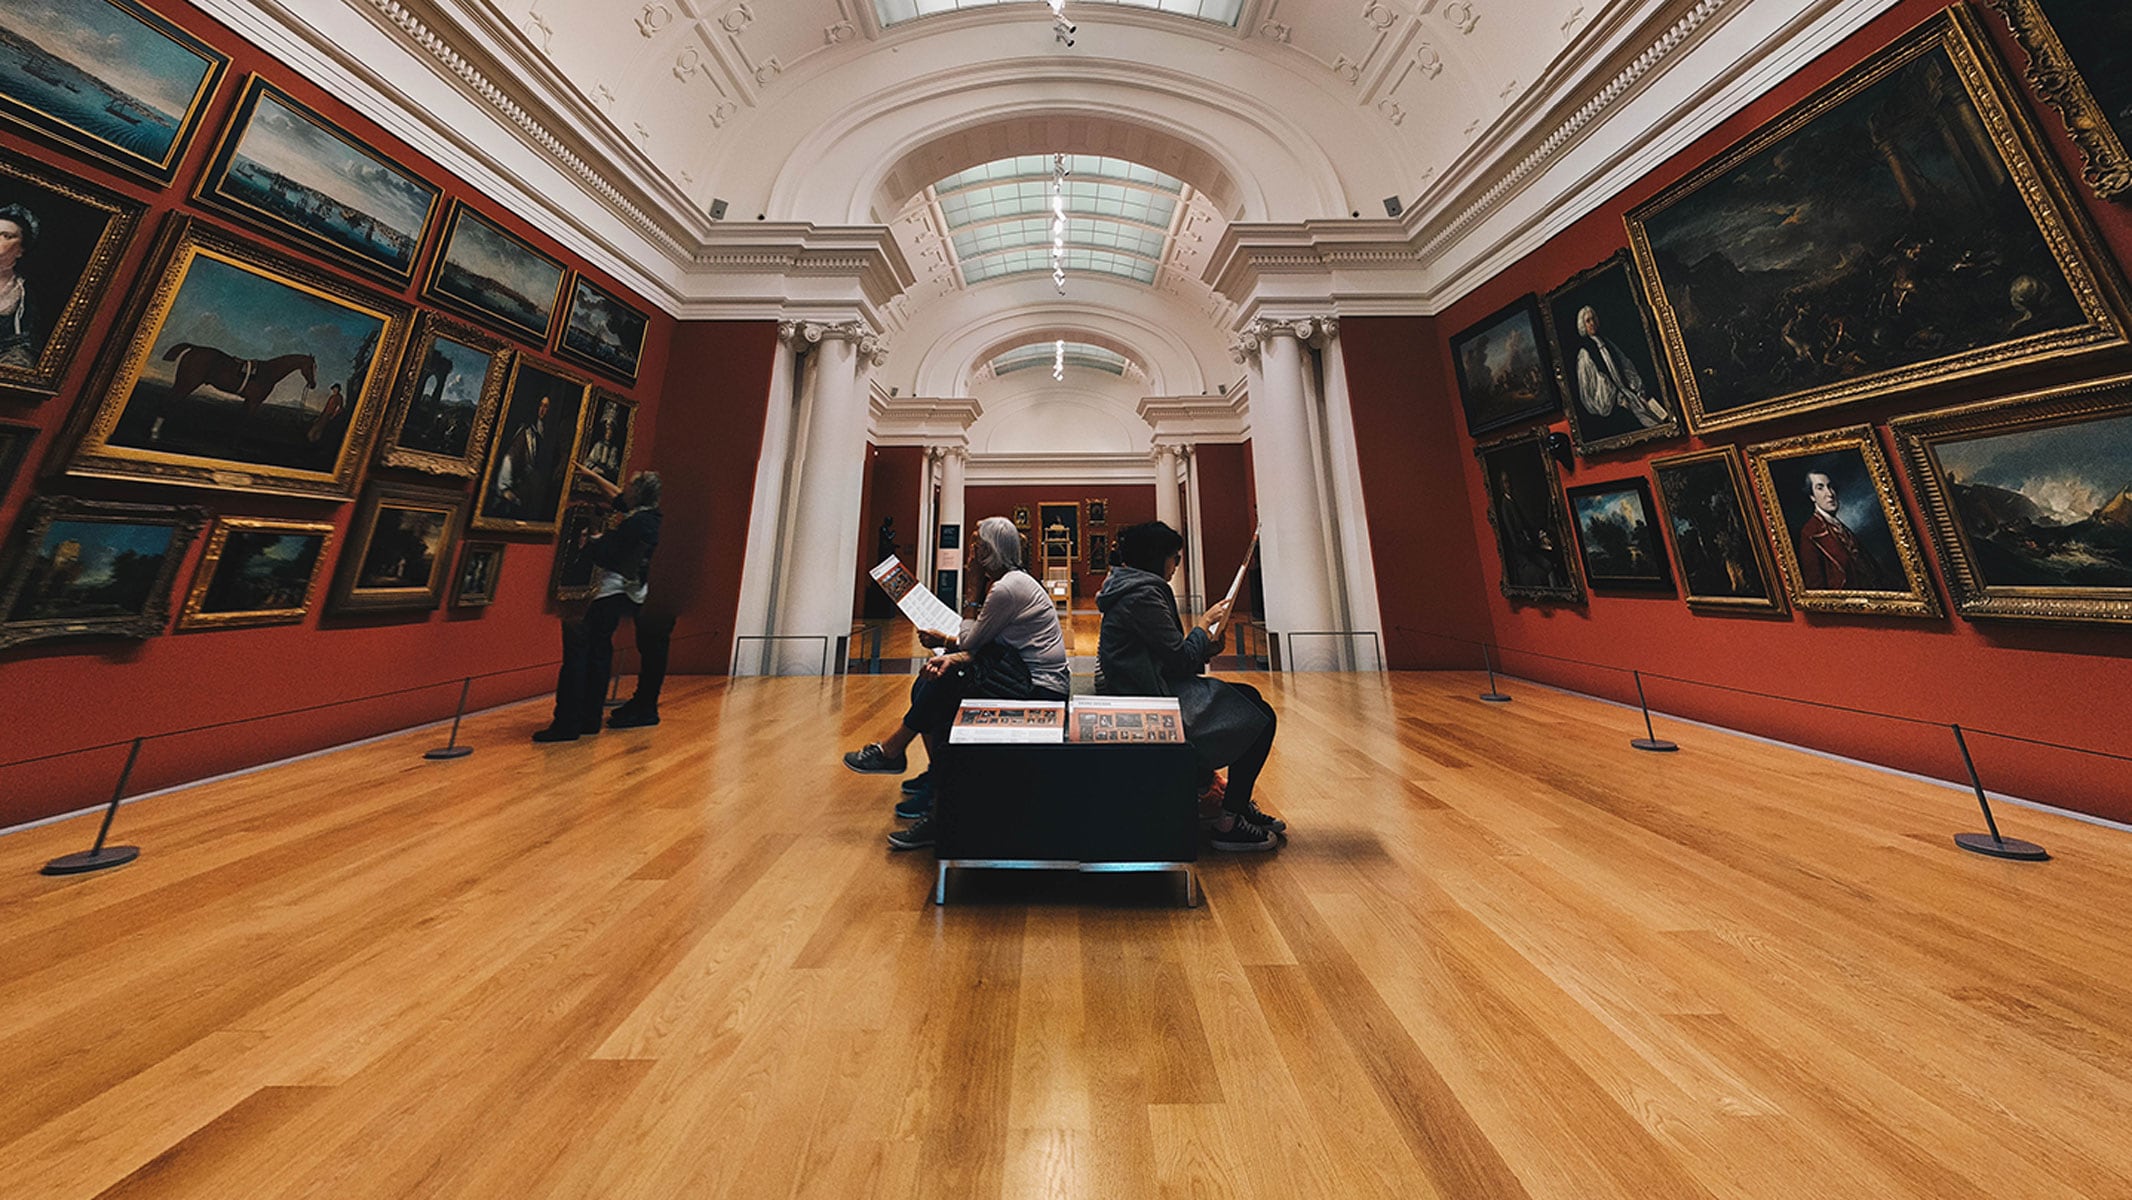 Sitting in Gallery